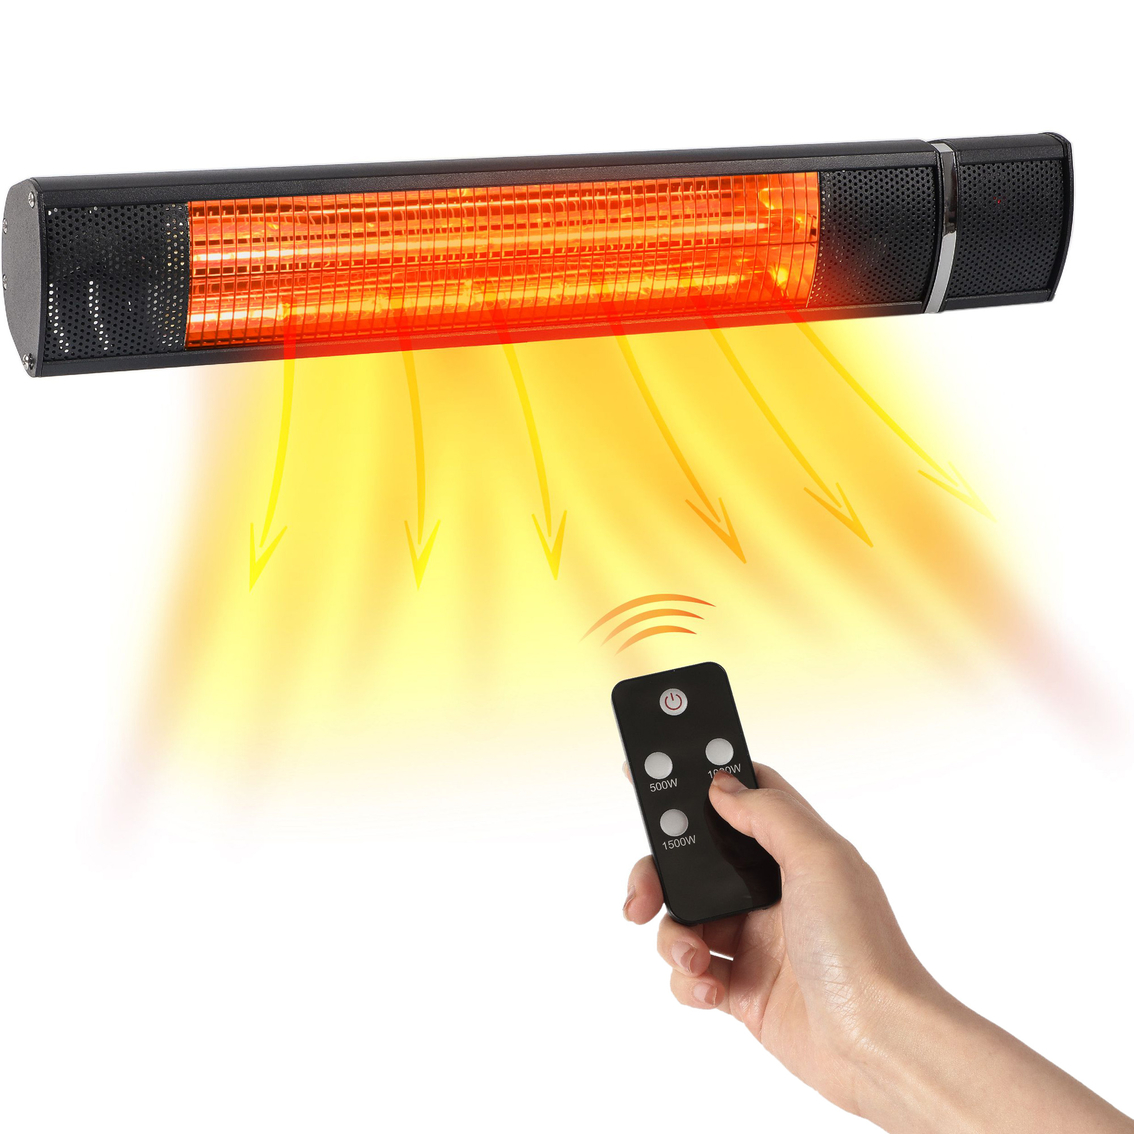 Black + Decker Wall Mounted Electric Patio Heater with Remote Control Functions